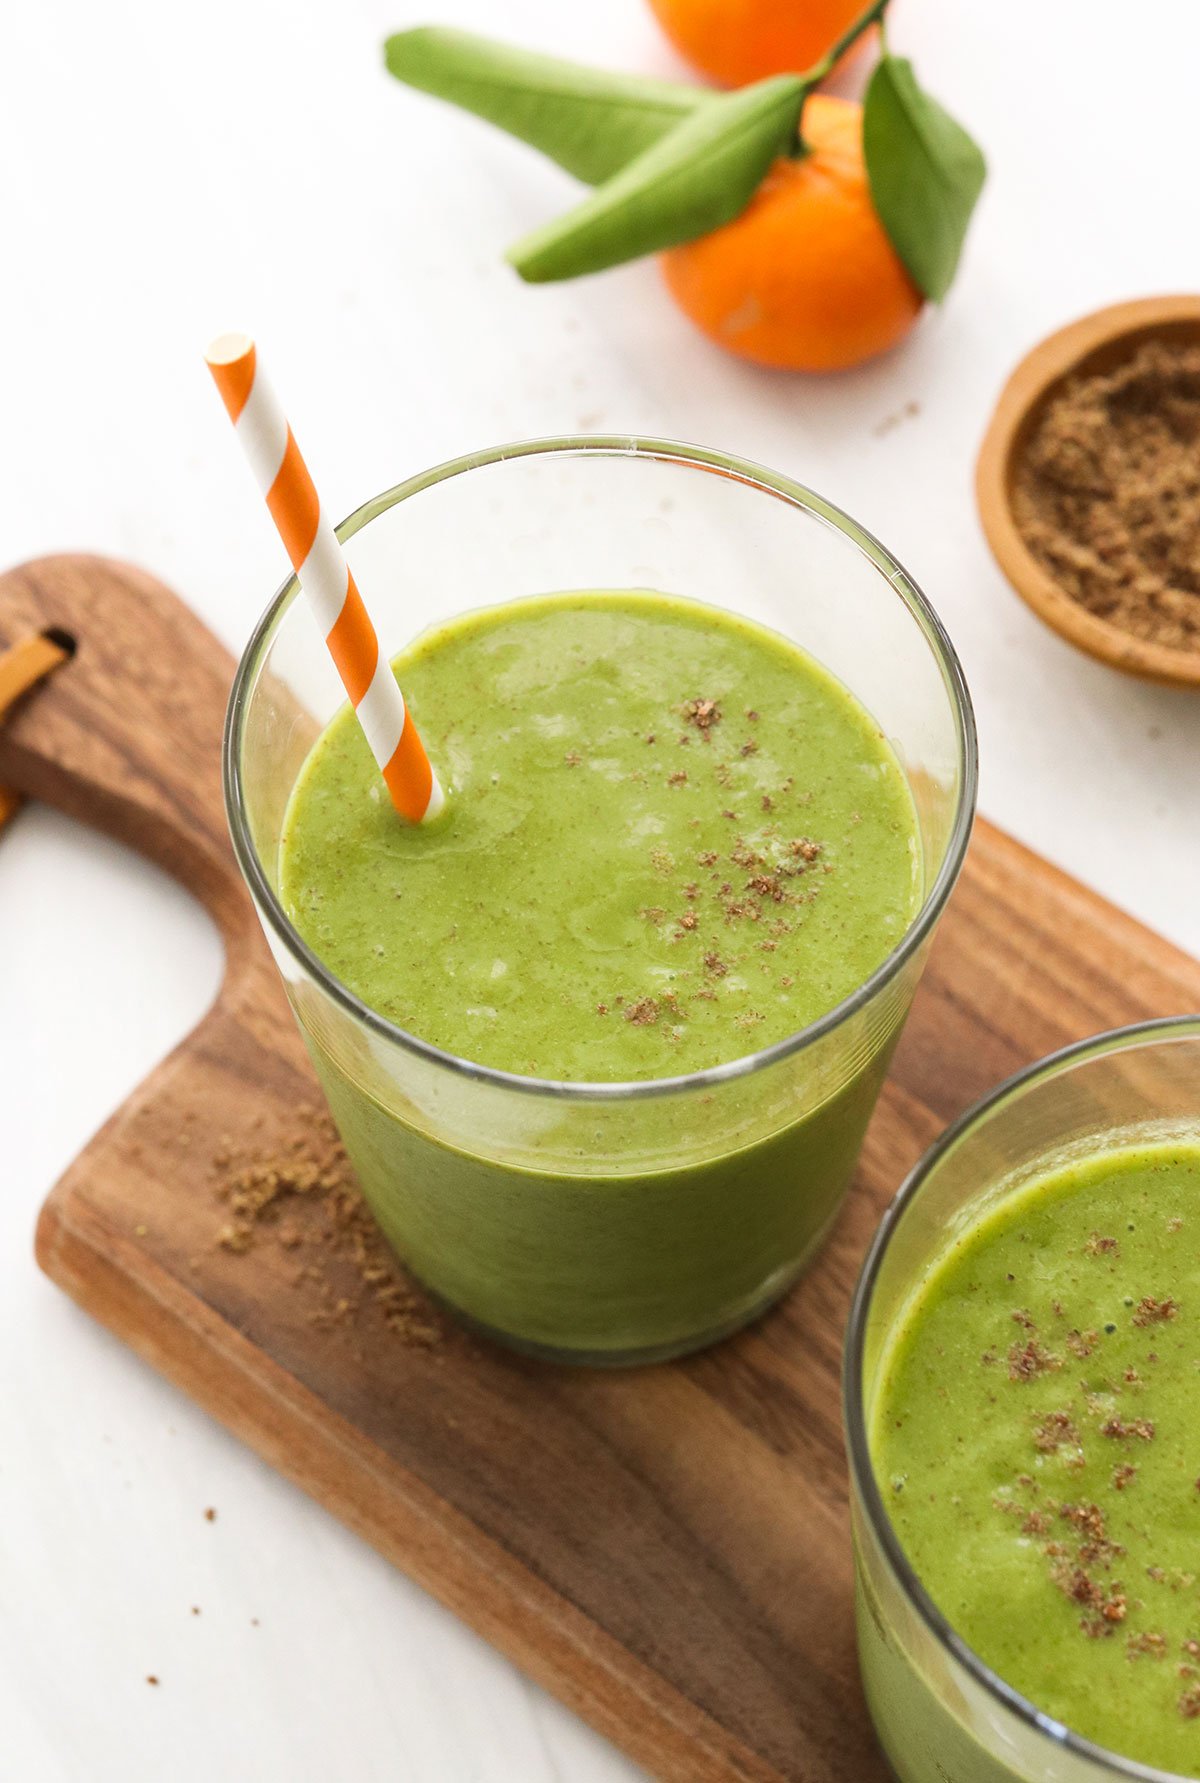 Green flax seed smoothie served with an orange striped straw.